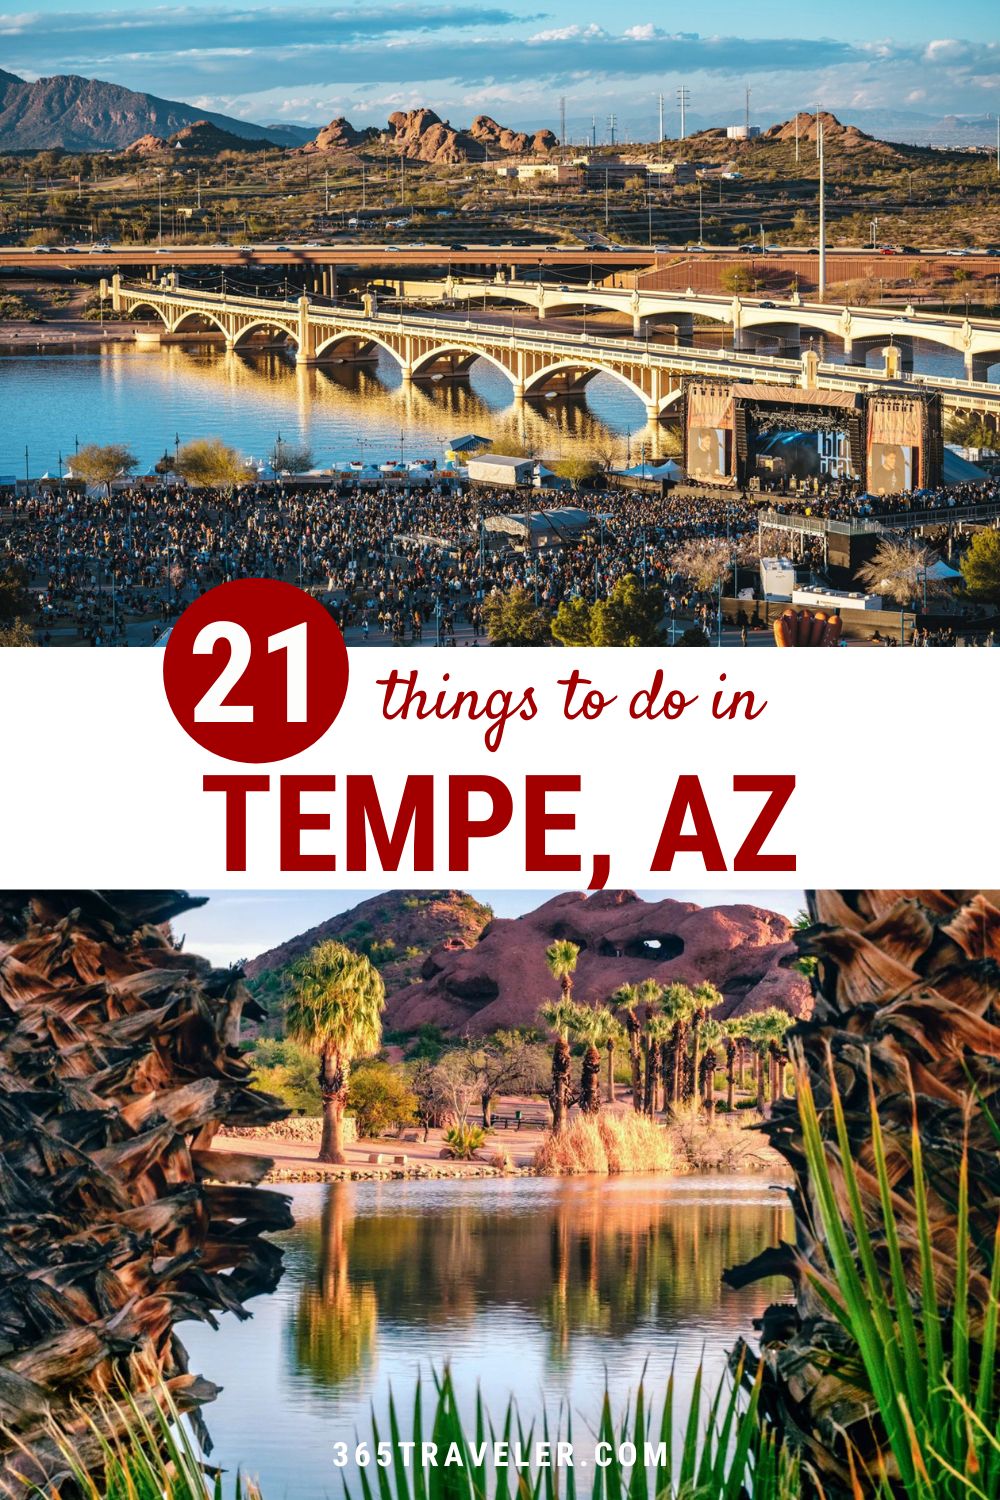 21 Really Amazing Things To Do in Tempe, Arizona